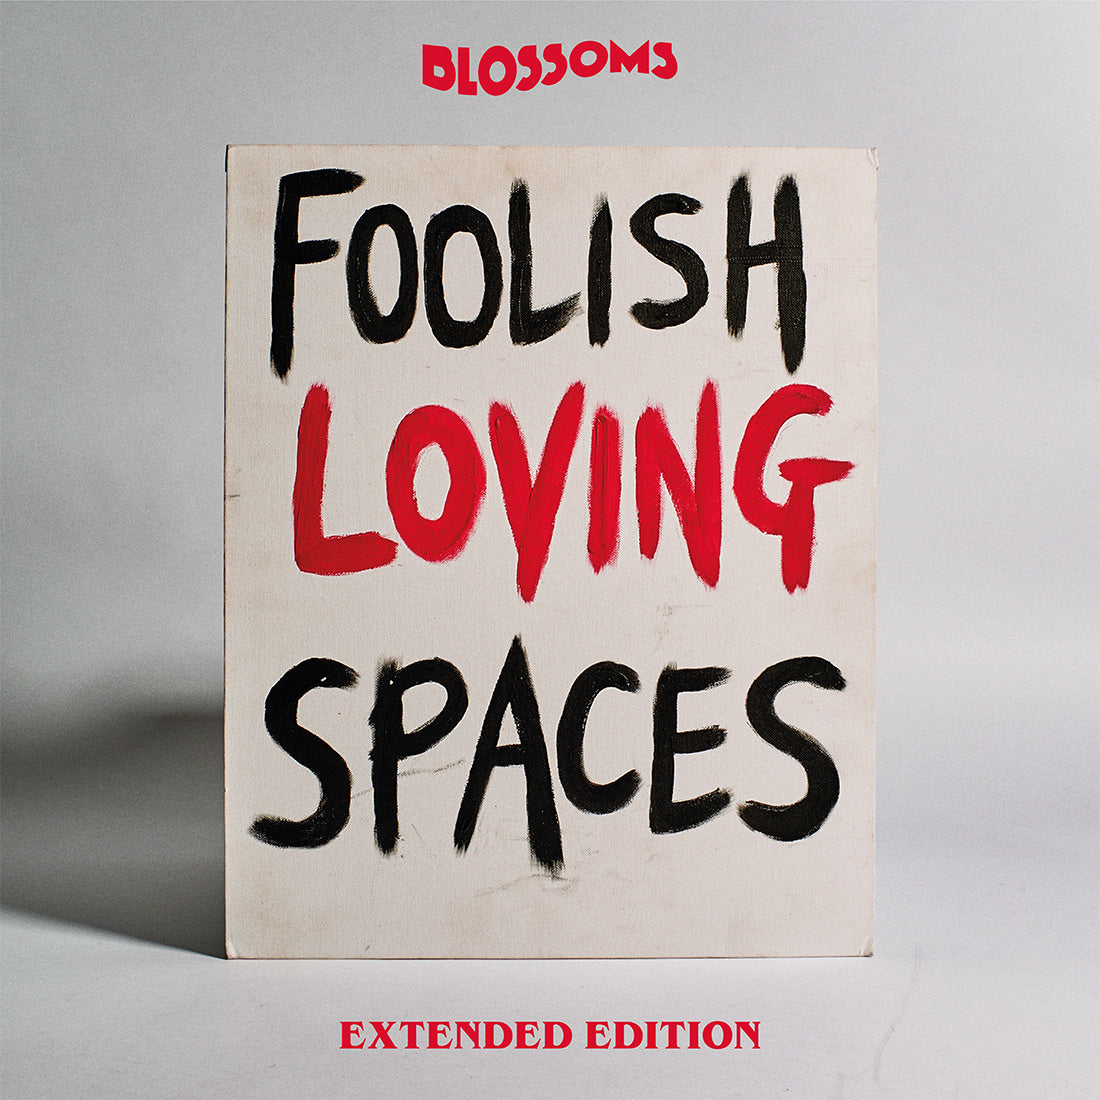 Blossoms - Foolish Loving Spaces (Extended Edition): 2CD